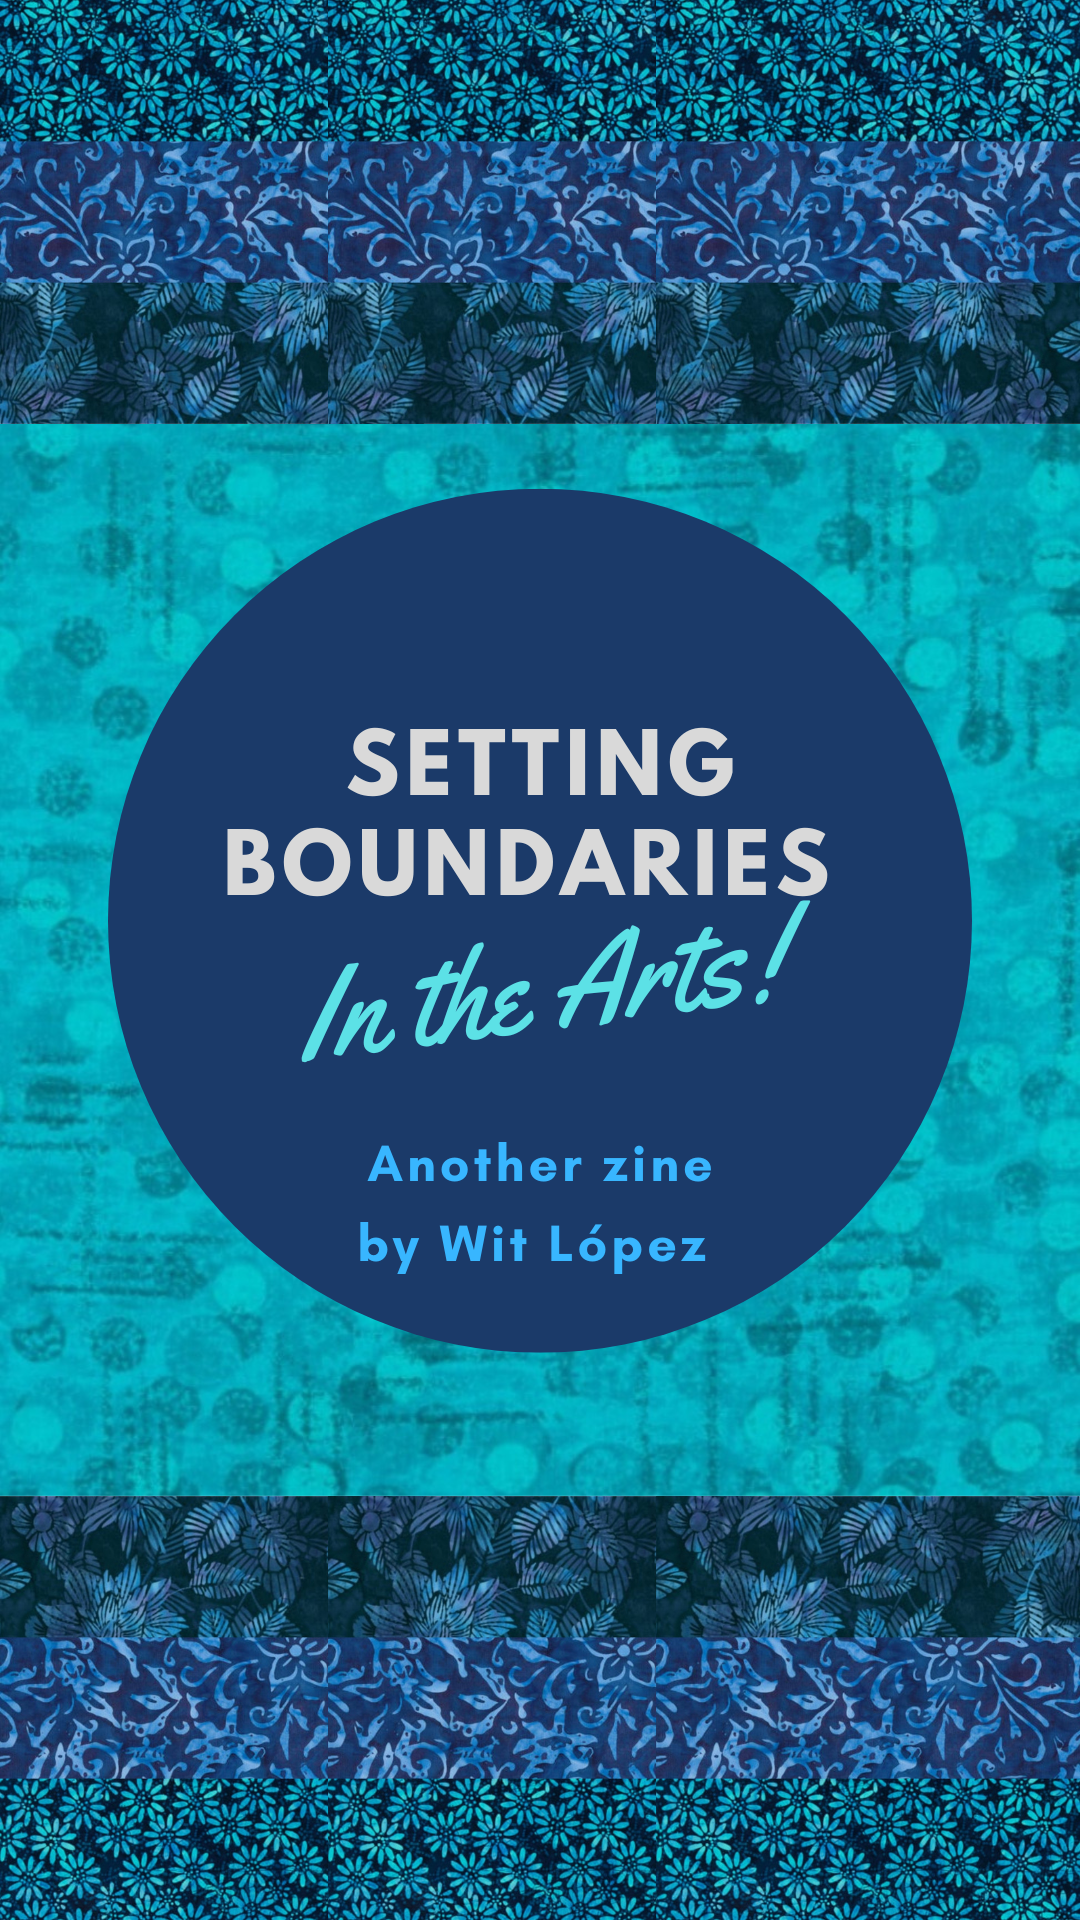 Setting Boundaries In The Arts: Another zine by Wit Lopez